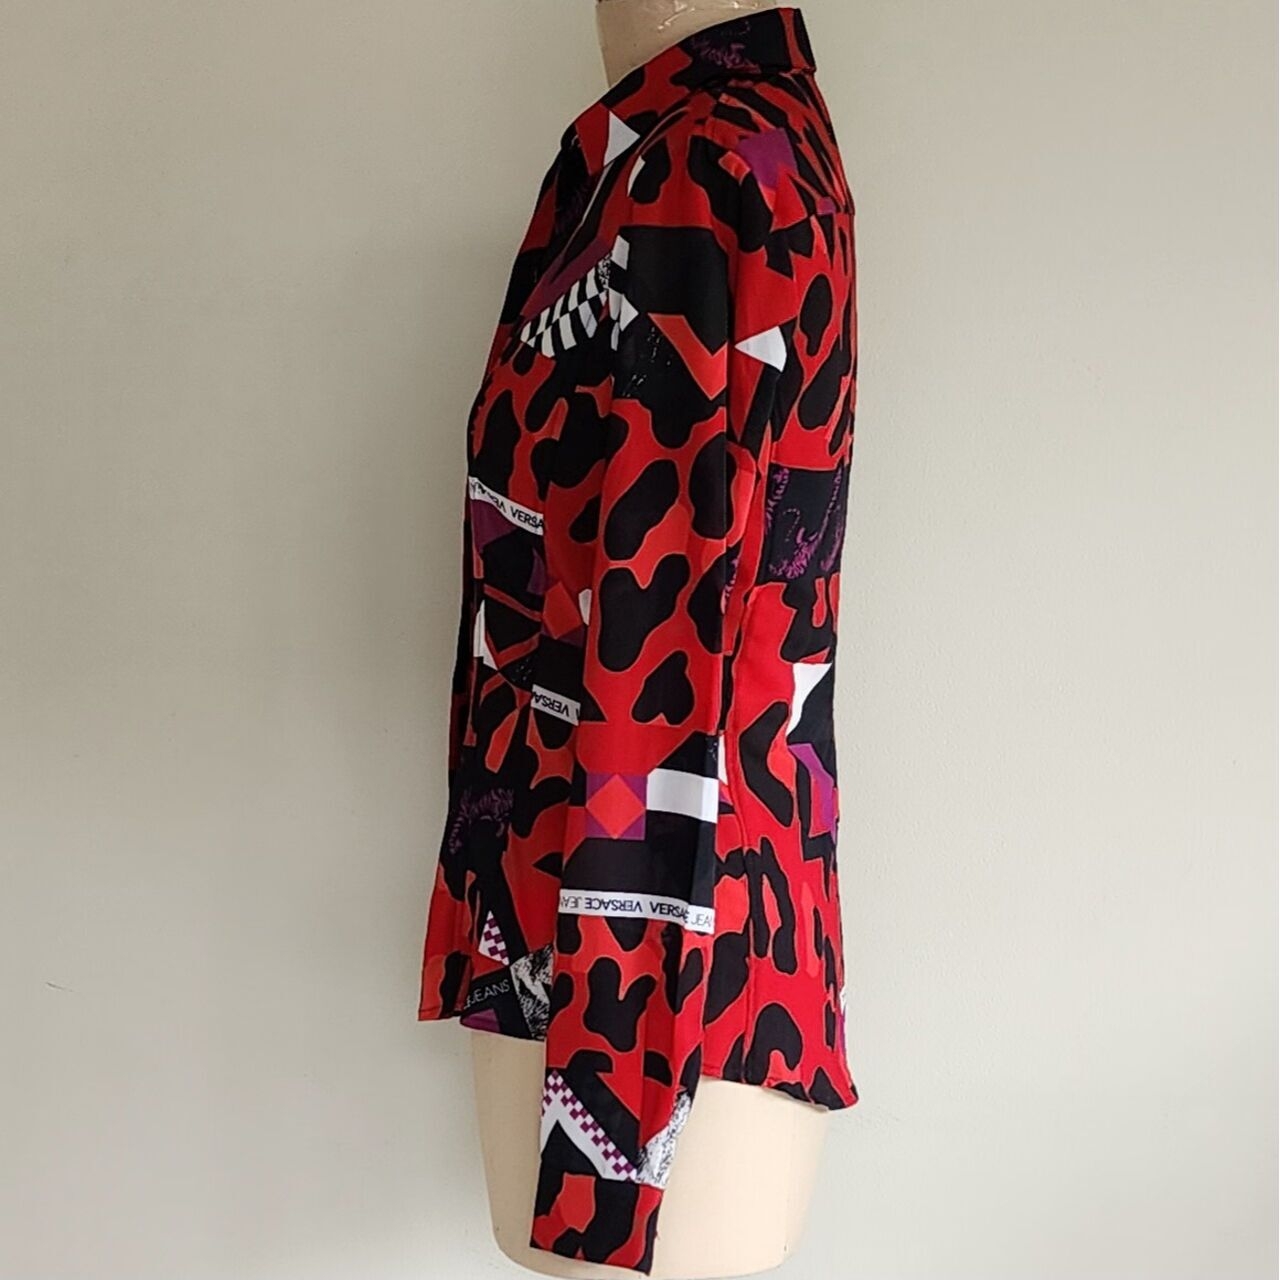 Versace Jeans Couture Animal Print Blouse